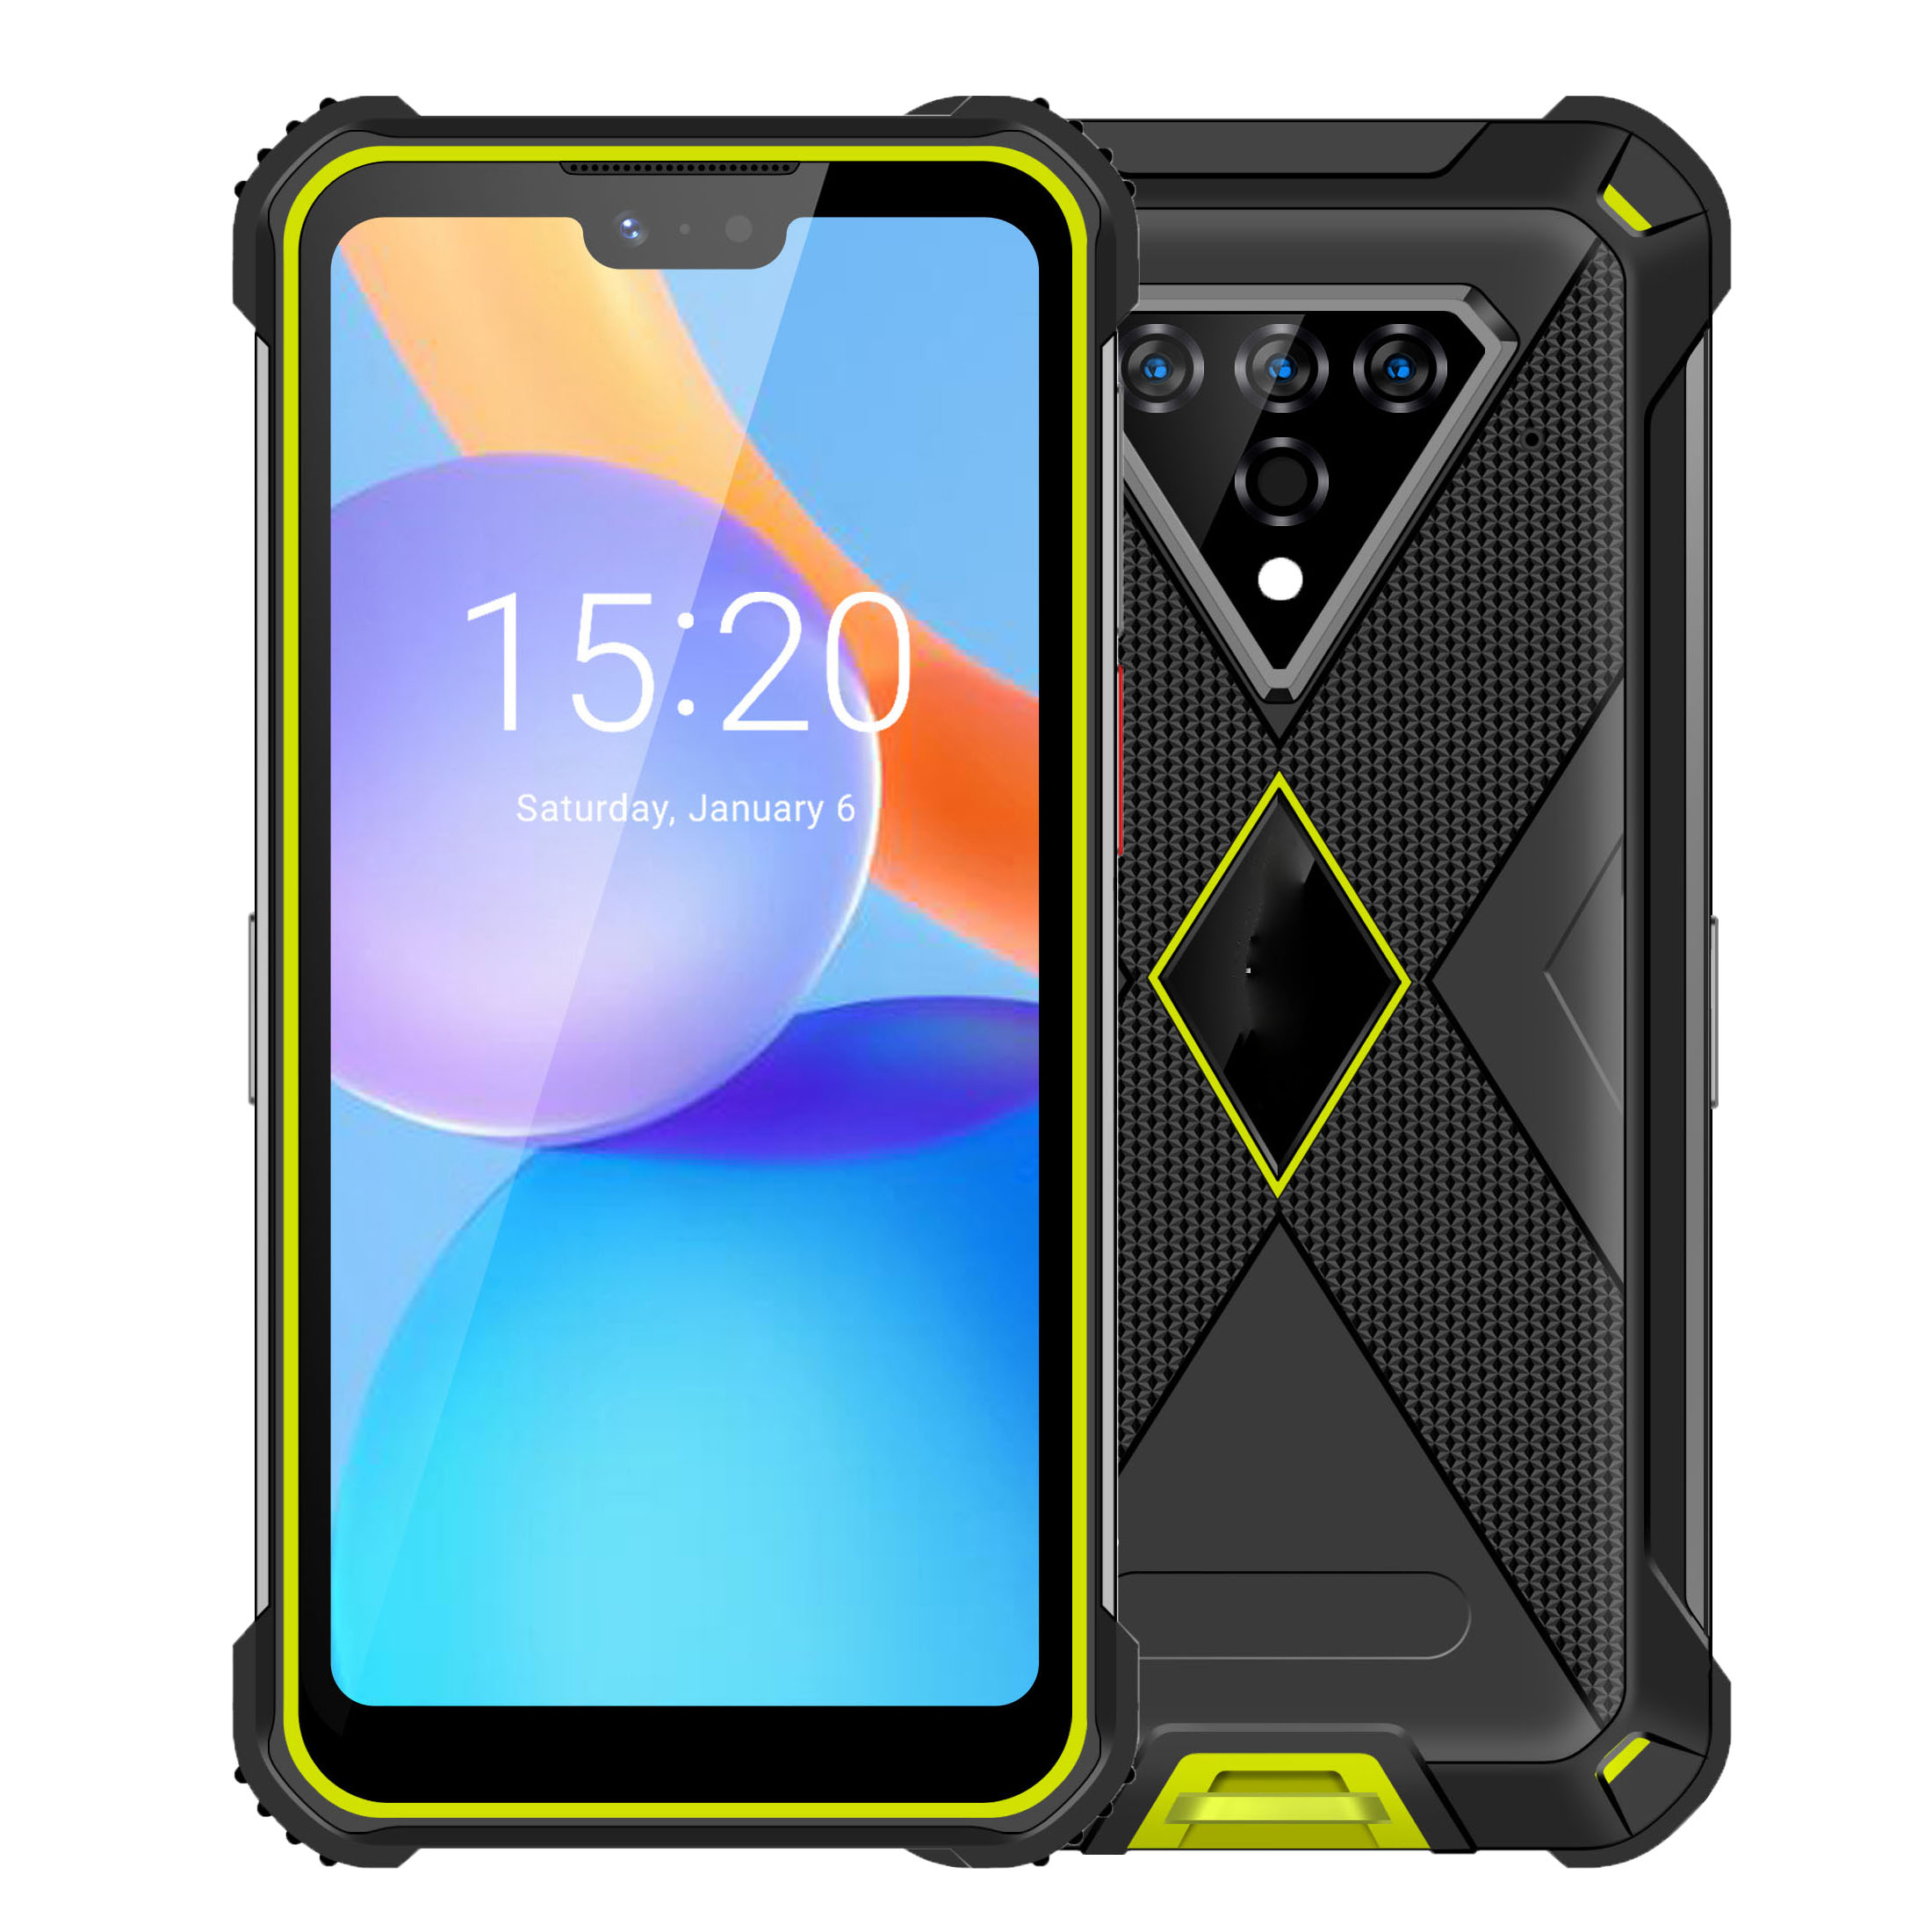 6 inch 4G android rugged phone